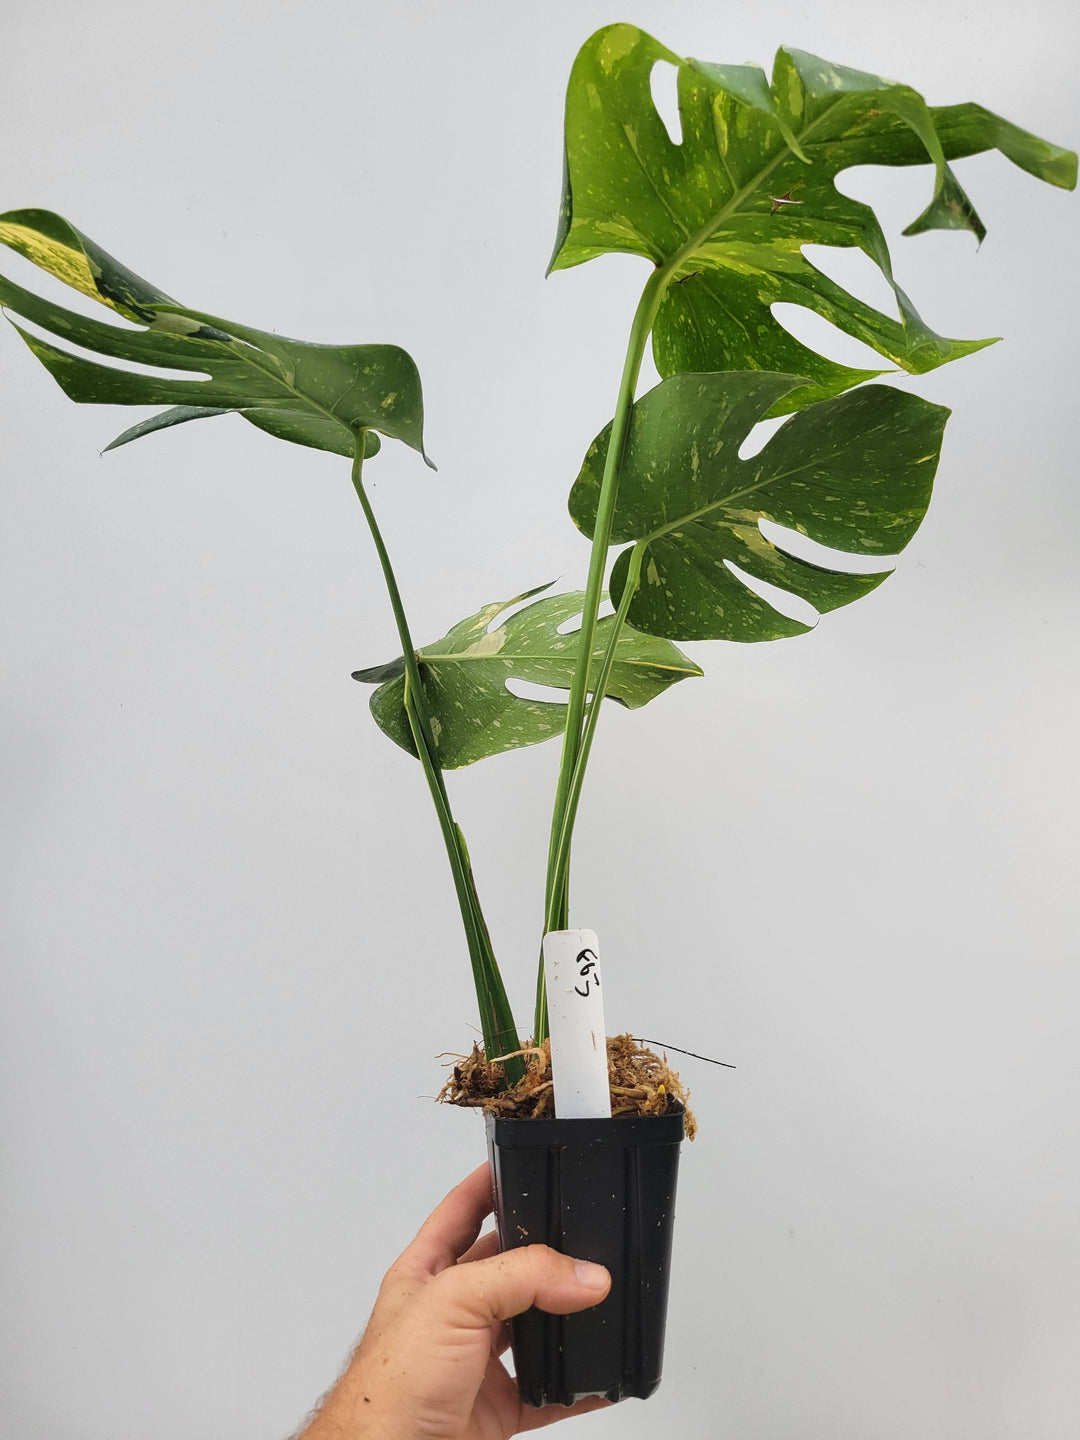 Monstera Thai Constellation, Nice XL size,  Highly variegated, Japanese Cultivar, exact plant pictured  US Seller #F62